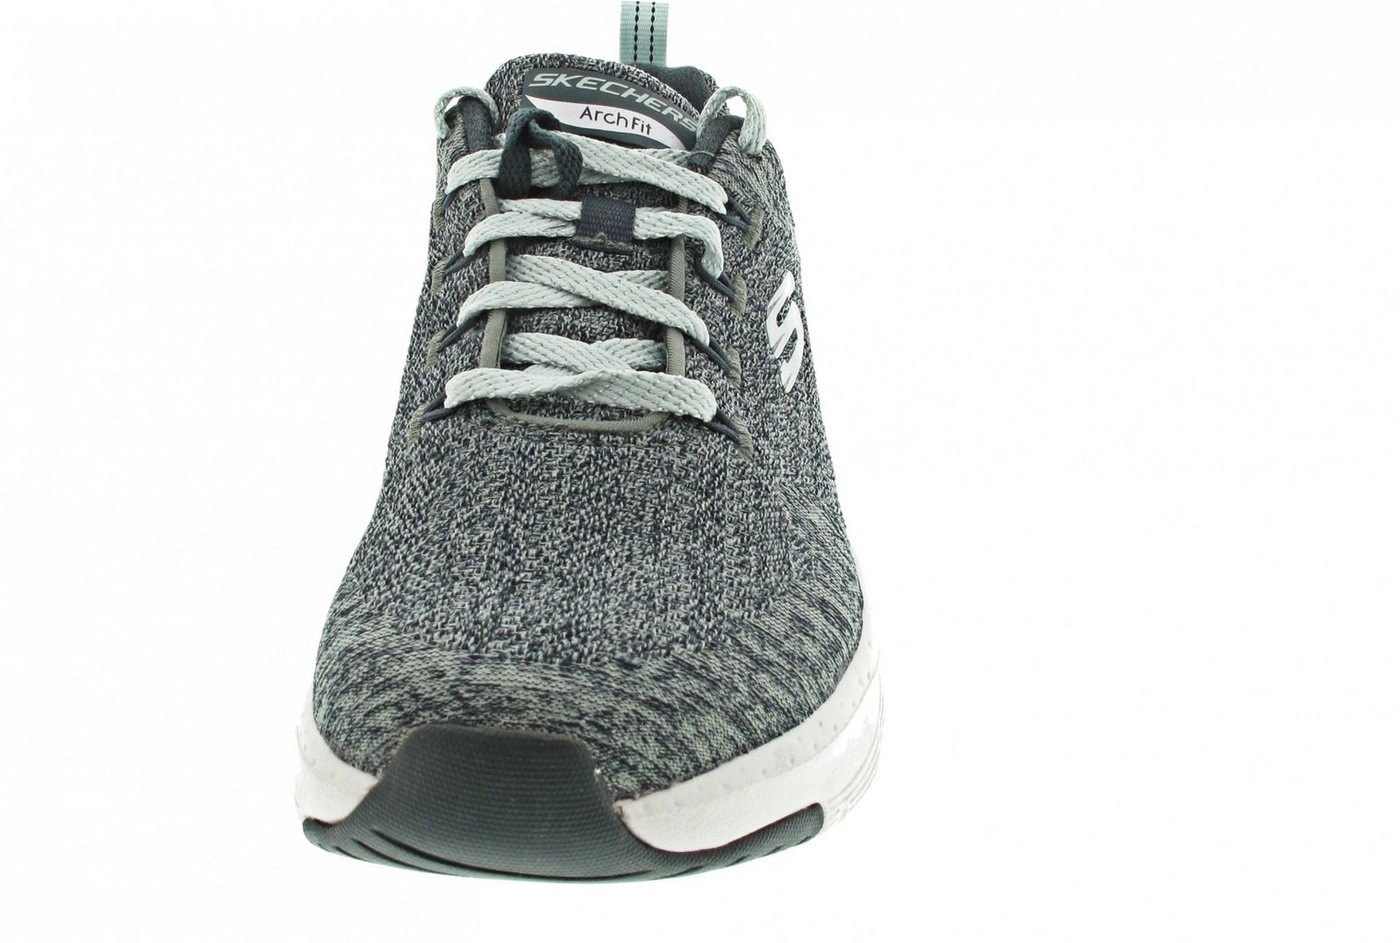 Skechers »Arch Fit-Comfy Wave« Sneaker